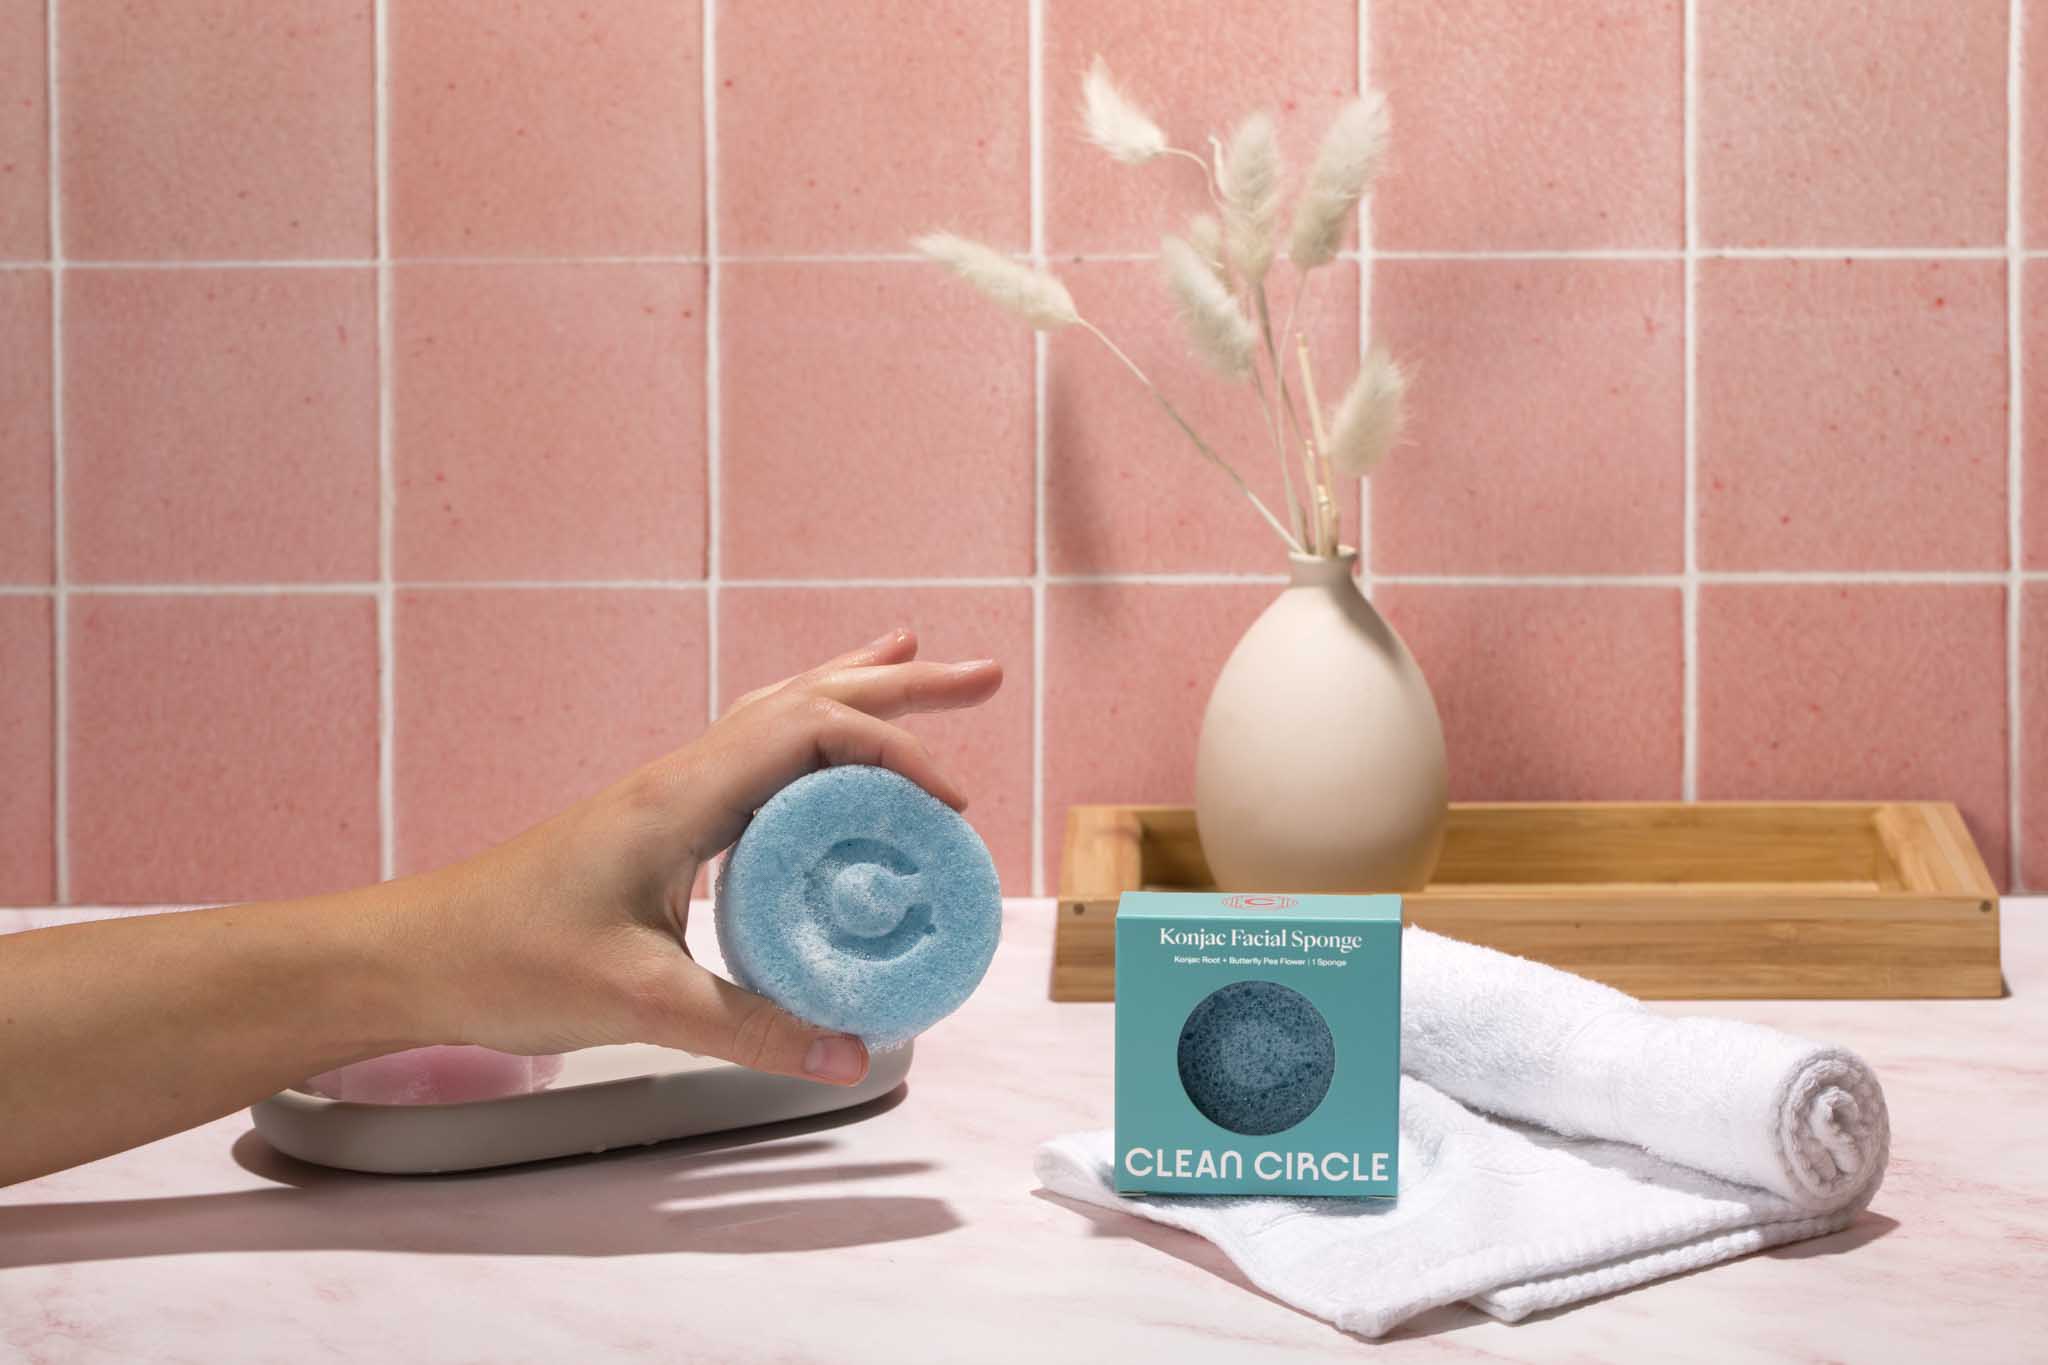 cleancircle- hand holding bluefly peaflower konjac facial sponge in bathroom setting with pink tiles in background and towel on counter